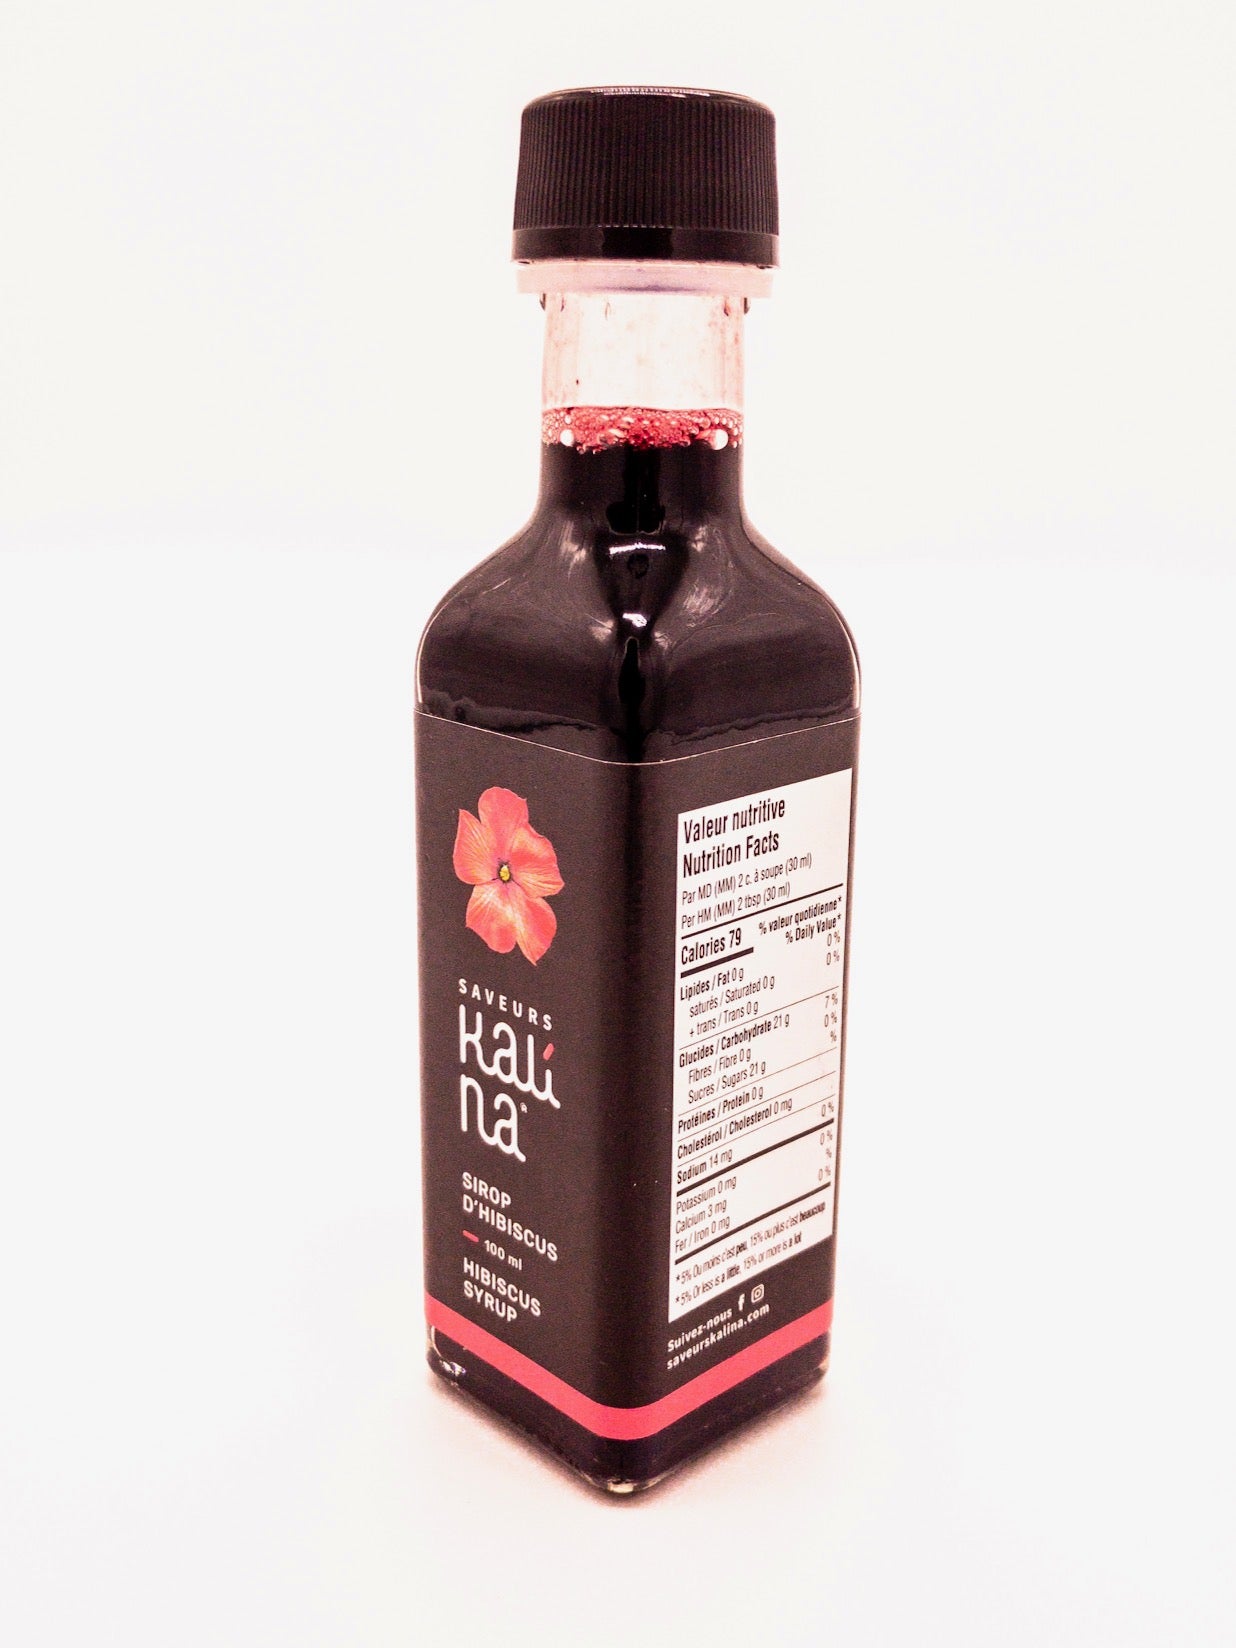 Hibiscus syrup